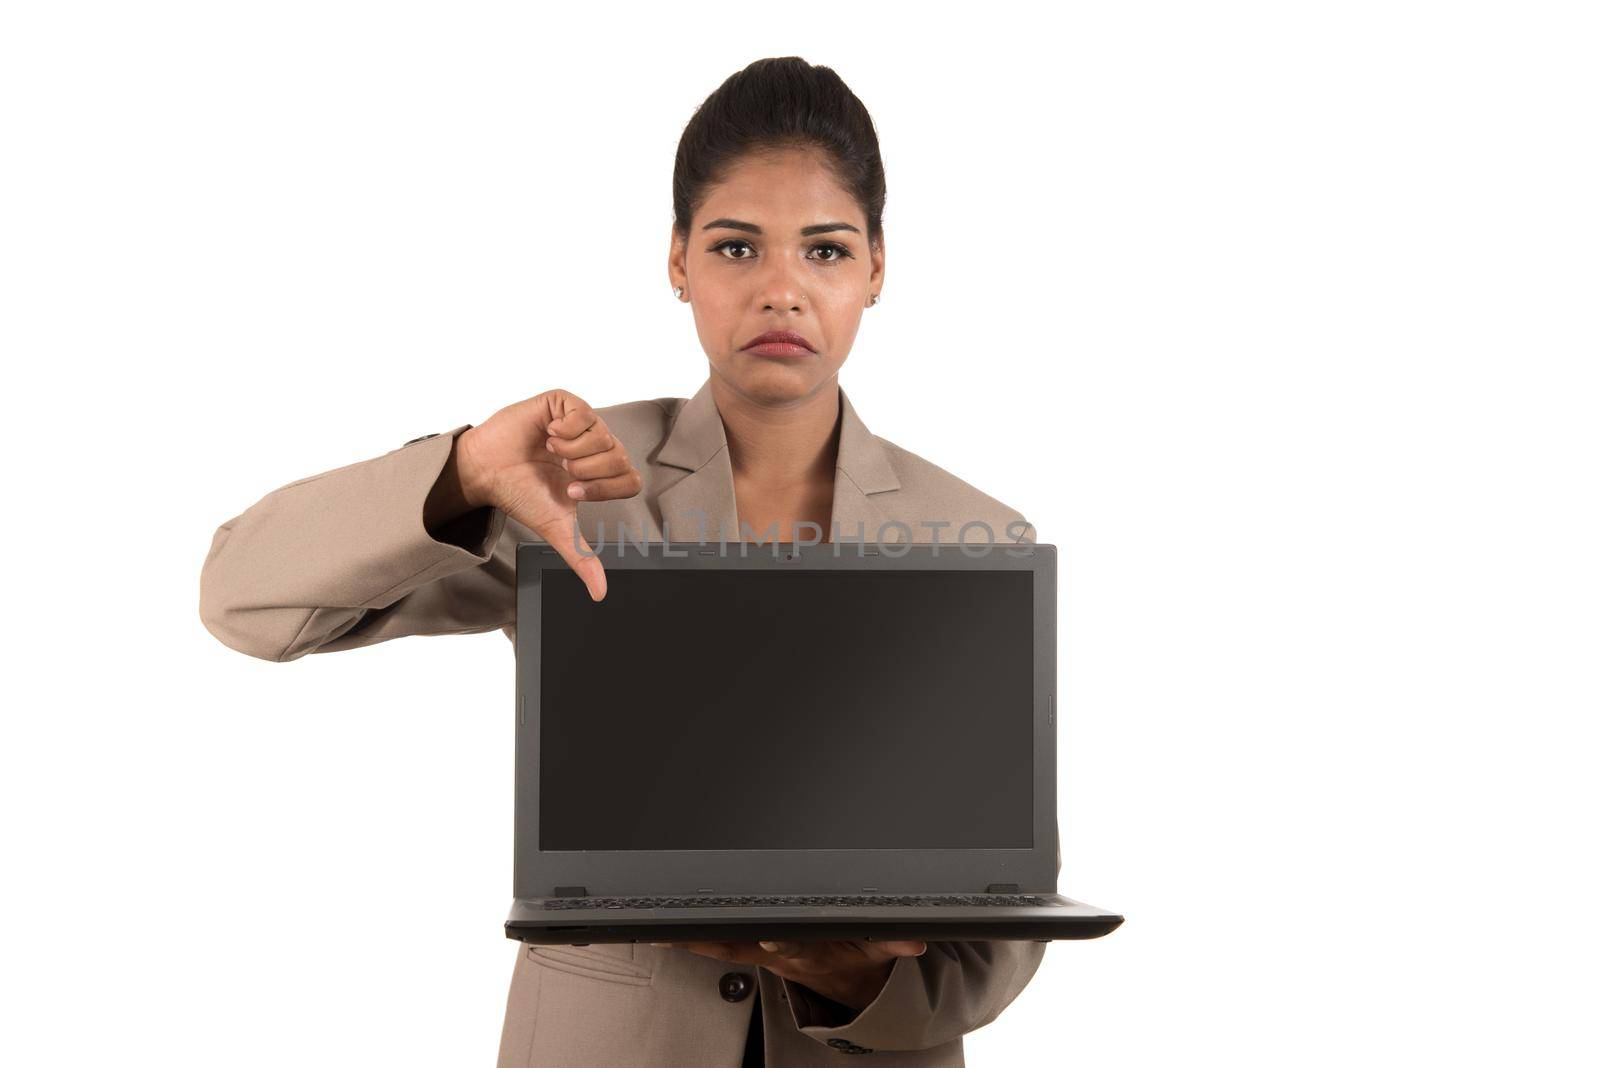 Unhappy business woman holding laptop and showing thumbs down isolated on a white background